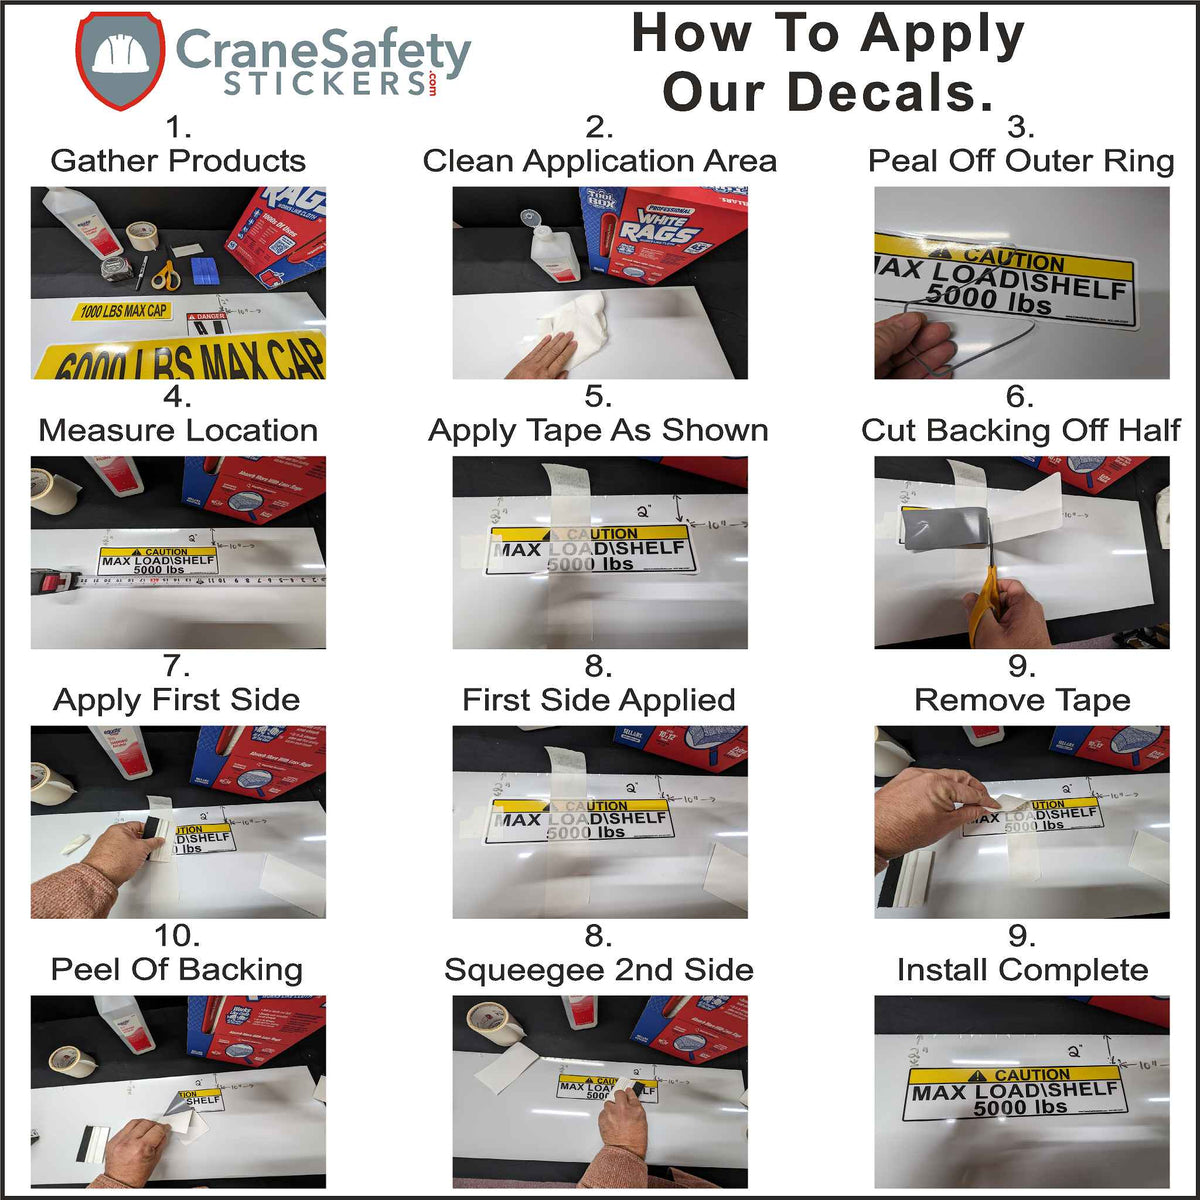 Directions On How To Apply Our Pinch Point Safety Sticker, Keep Clear Of Moving Parts To Prevent Bodily Injury.